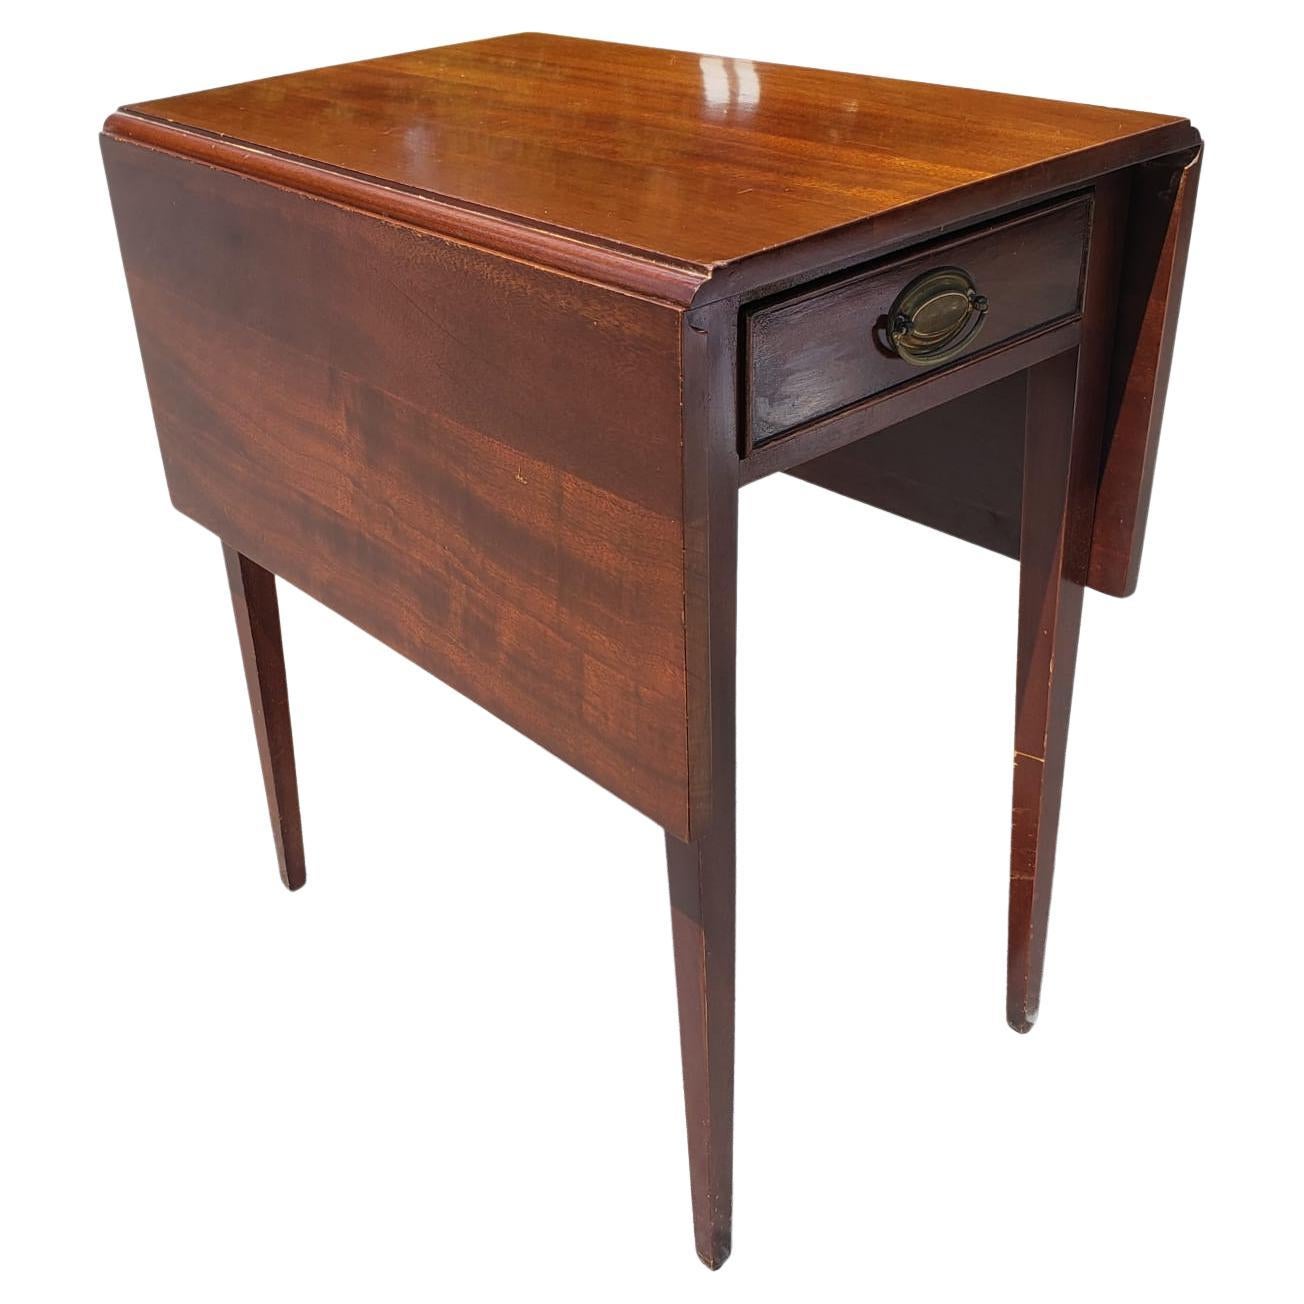 1940s vintage federal style mahogany drop leaf table in good vintage condition with felt lined drawer.
Measure 15.5